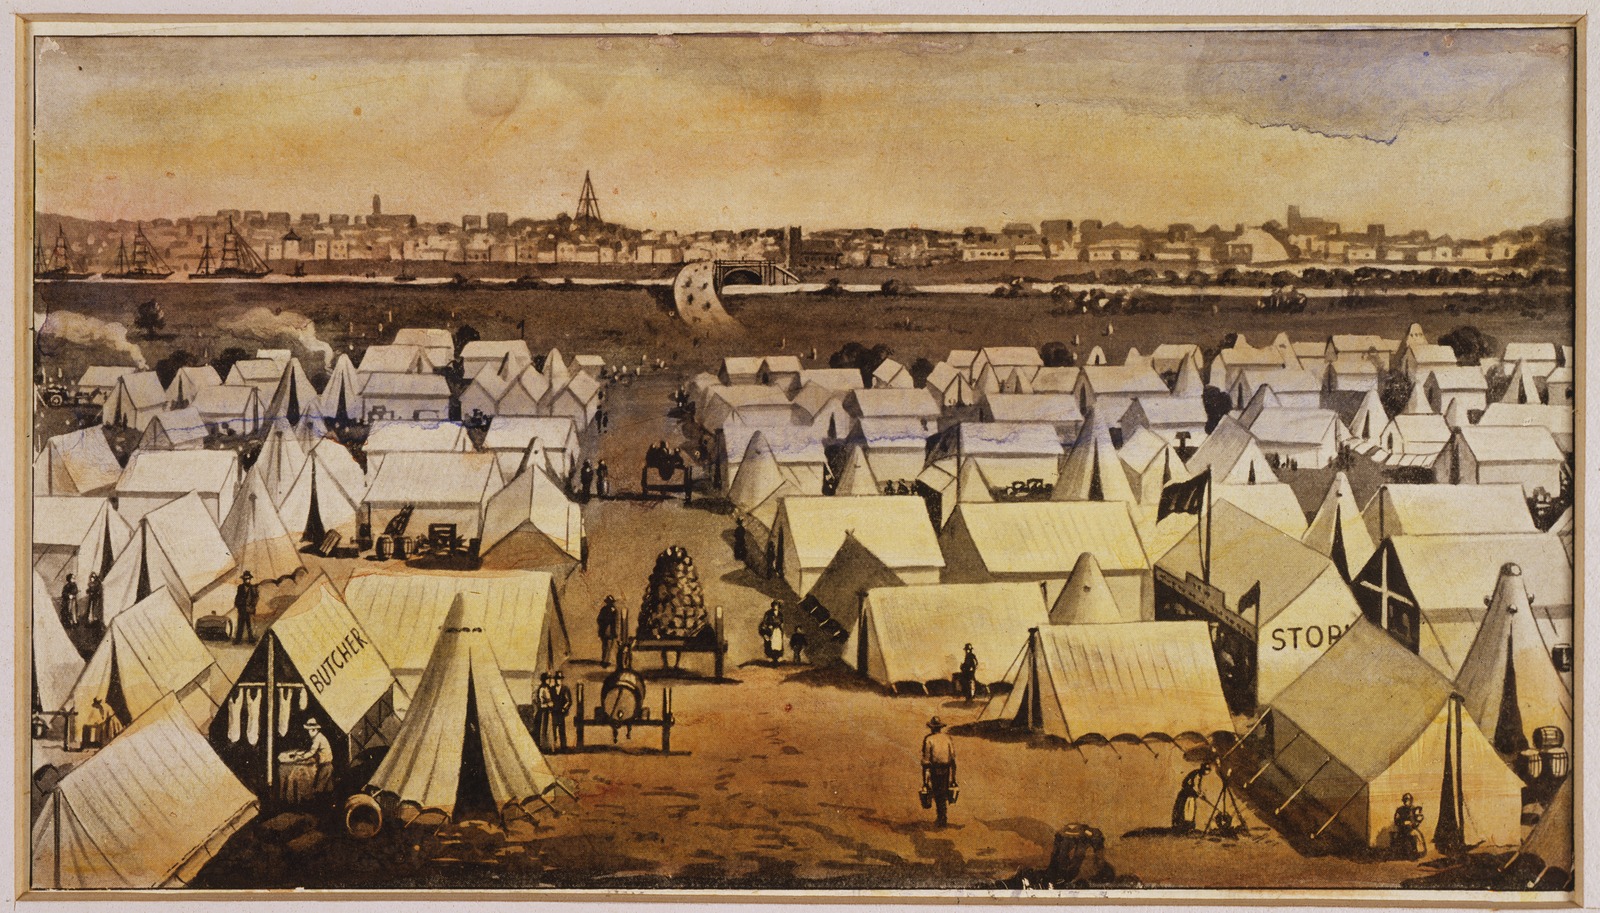 Canvas Town in the 1850s